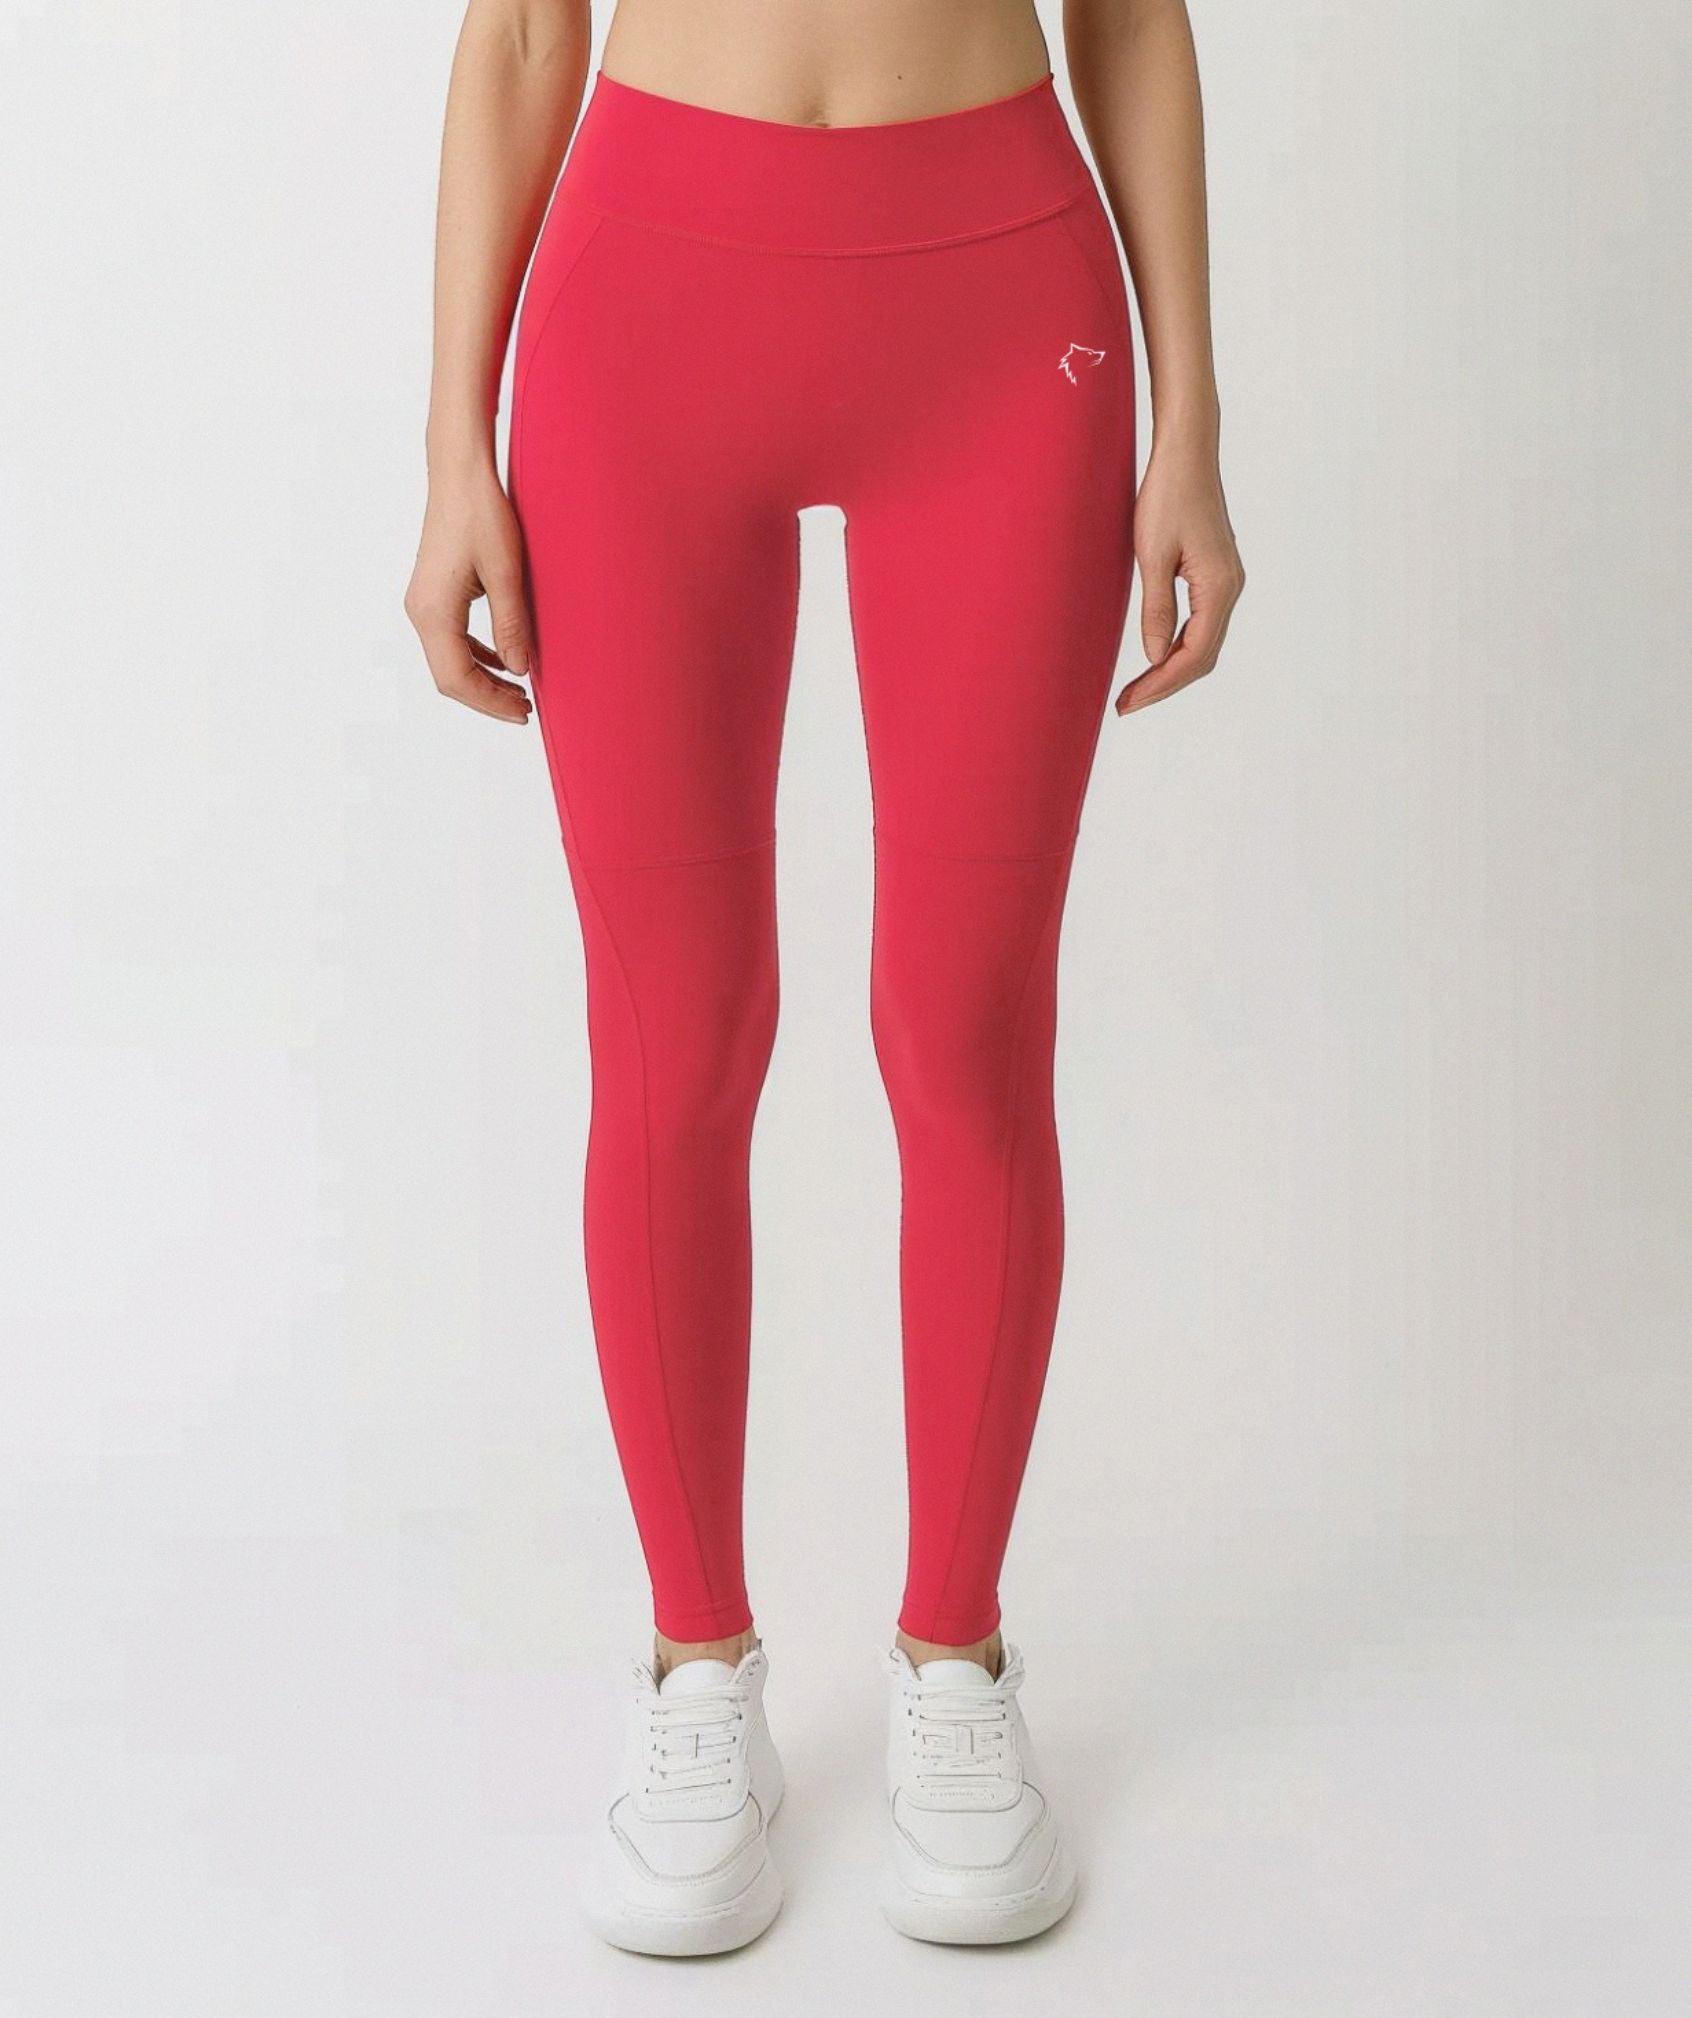 Apex™ red Harmony Leggings front view - eco-friendly and comfortable leggings